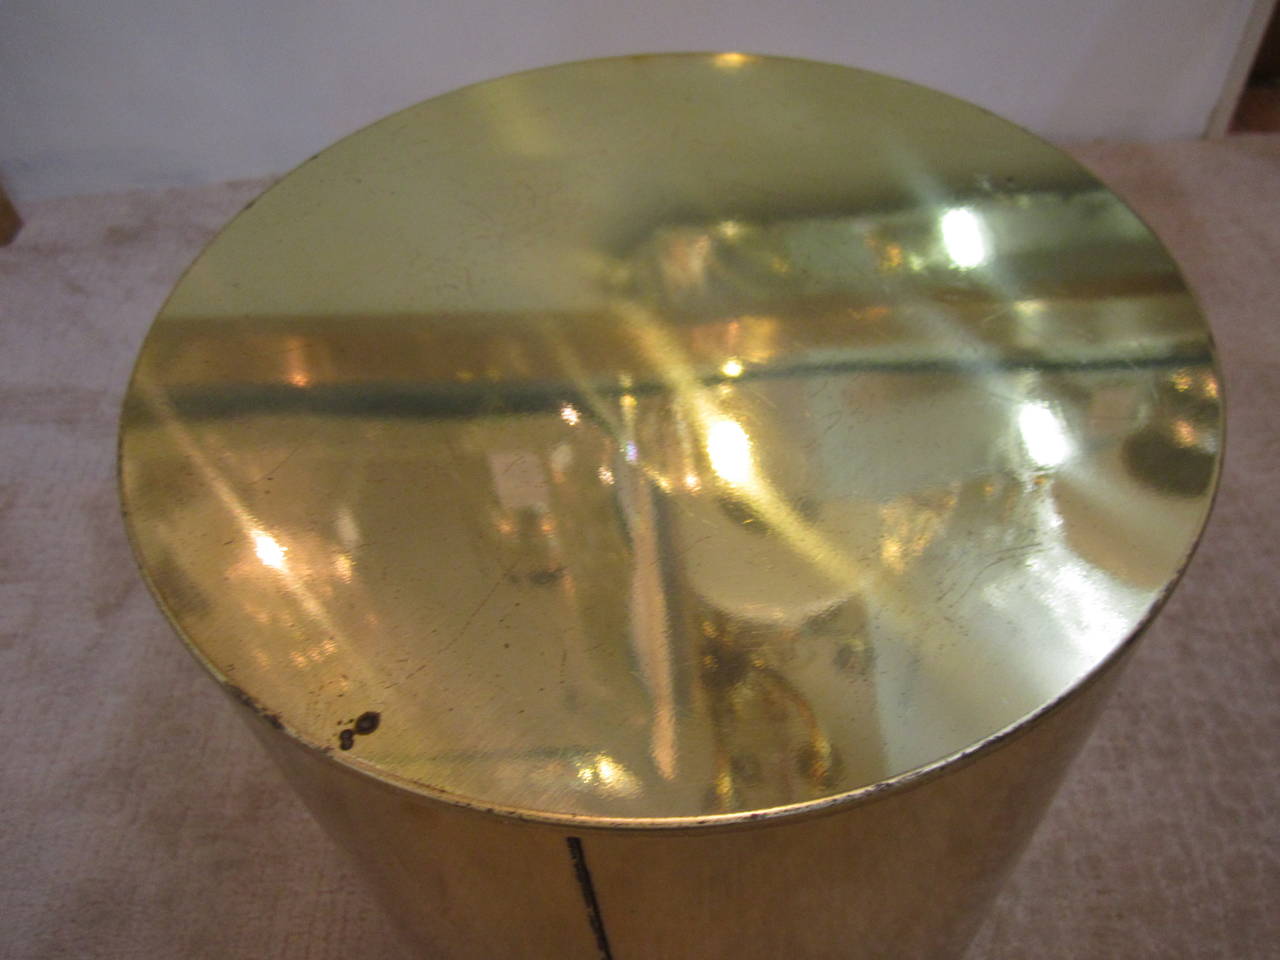 1970s modern brass drum side or end table designed and signed
by C. Jere. This single brass drum side or end table is made by the American company Artisan House. Item available here online, and by request, can be made available at my showcase space